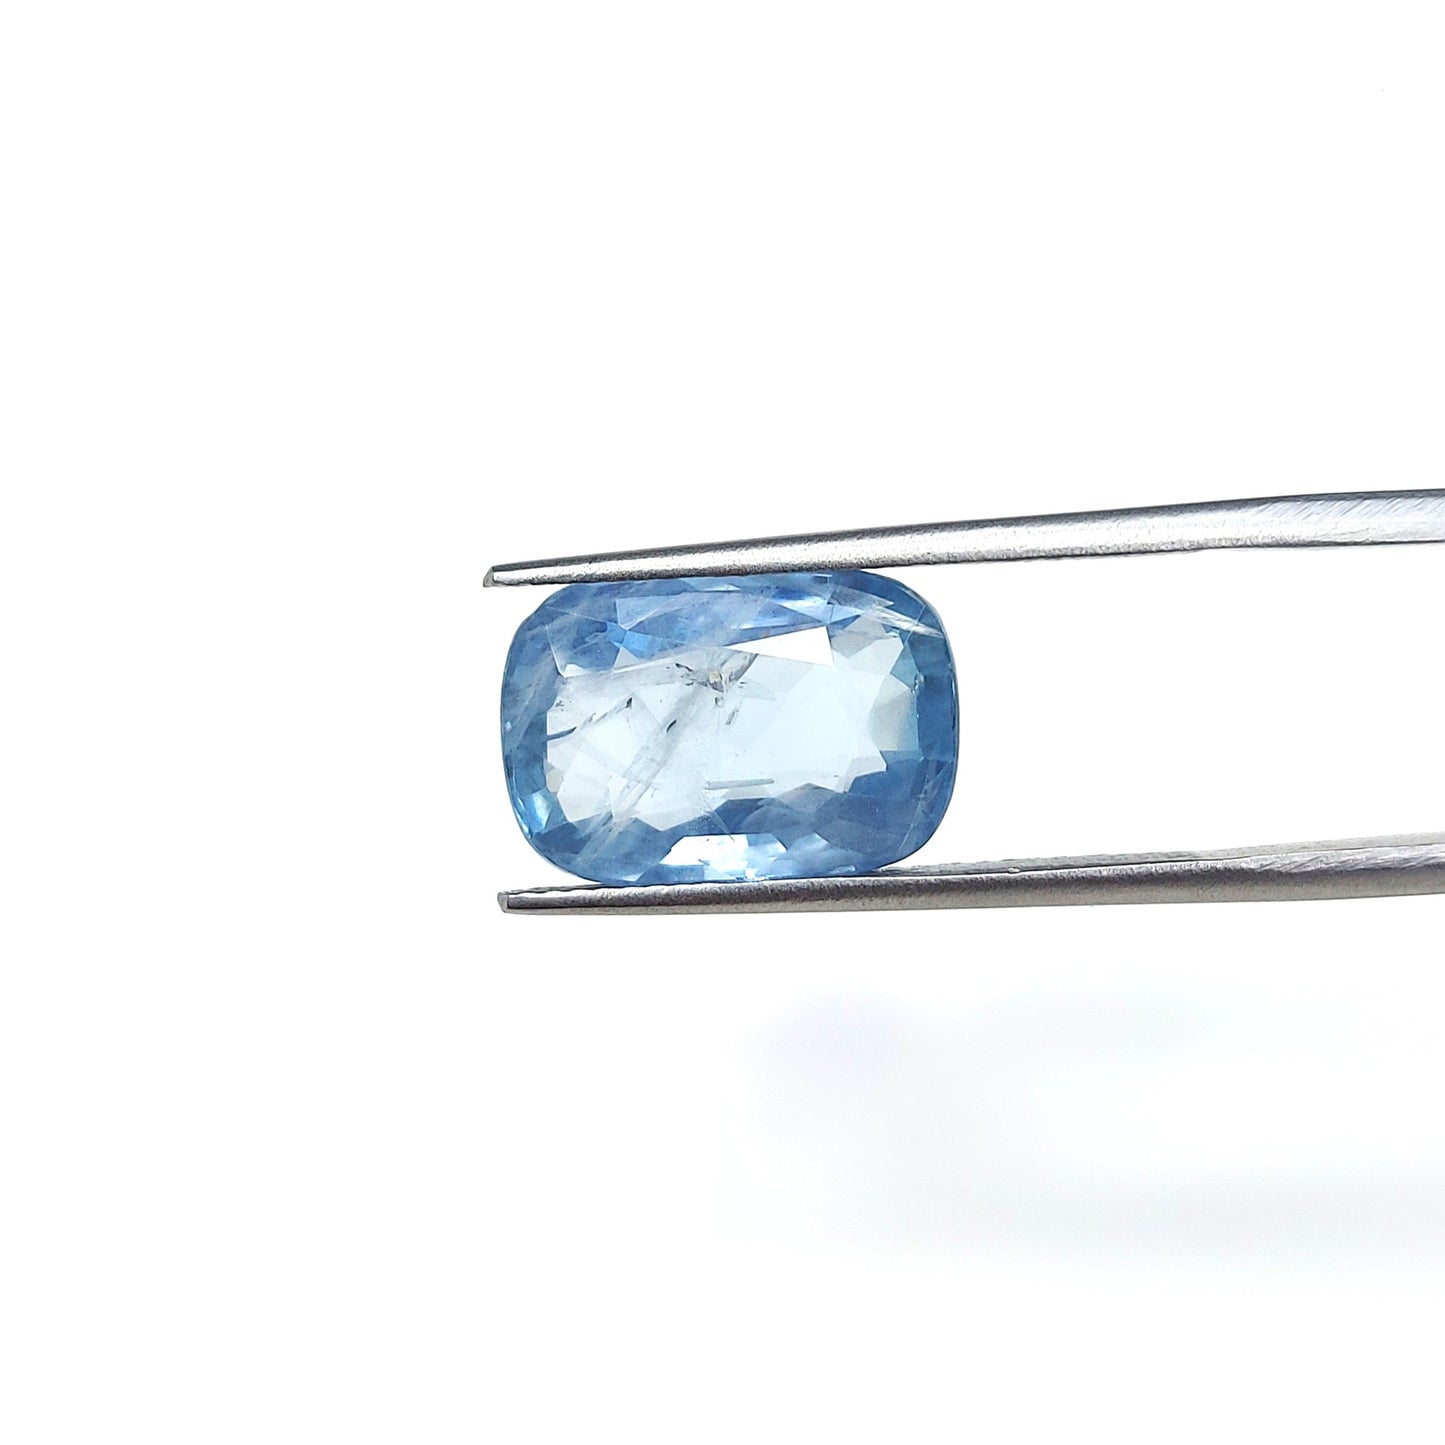 100% Natural Unheated Blue sapphire| 8.25cts